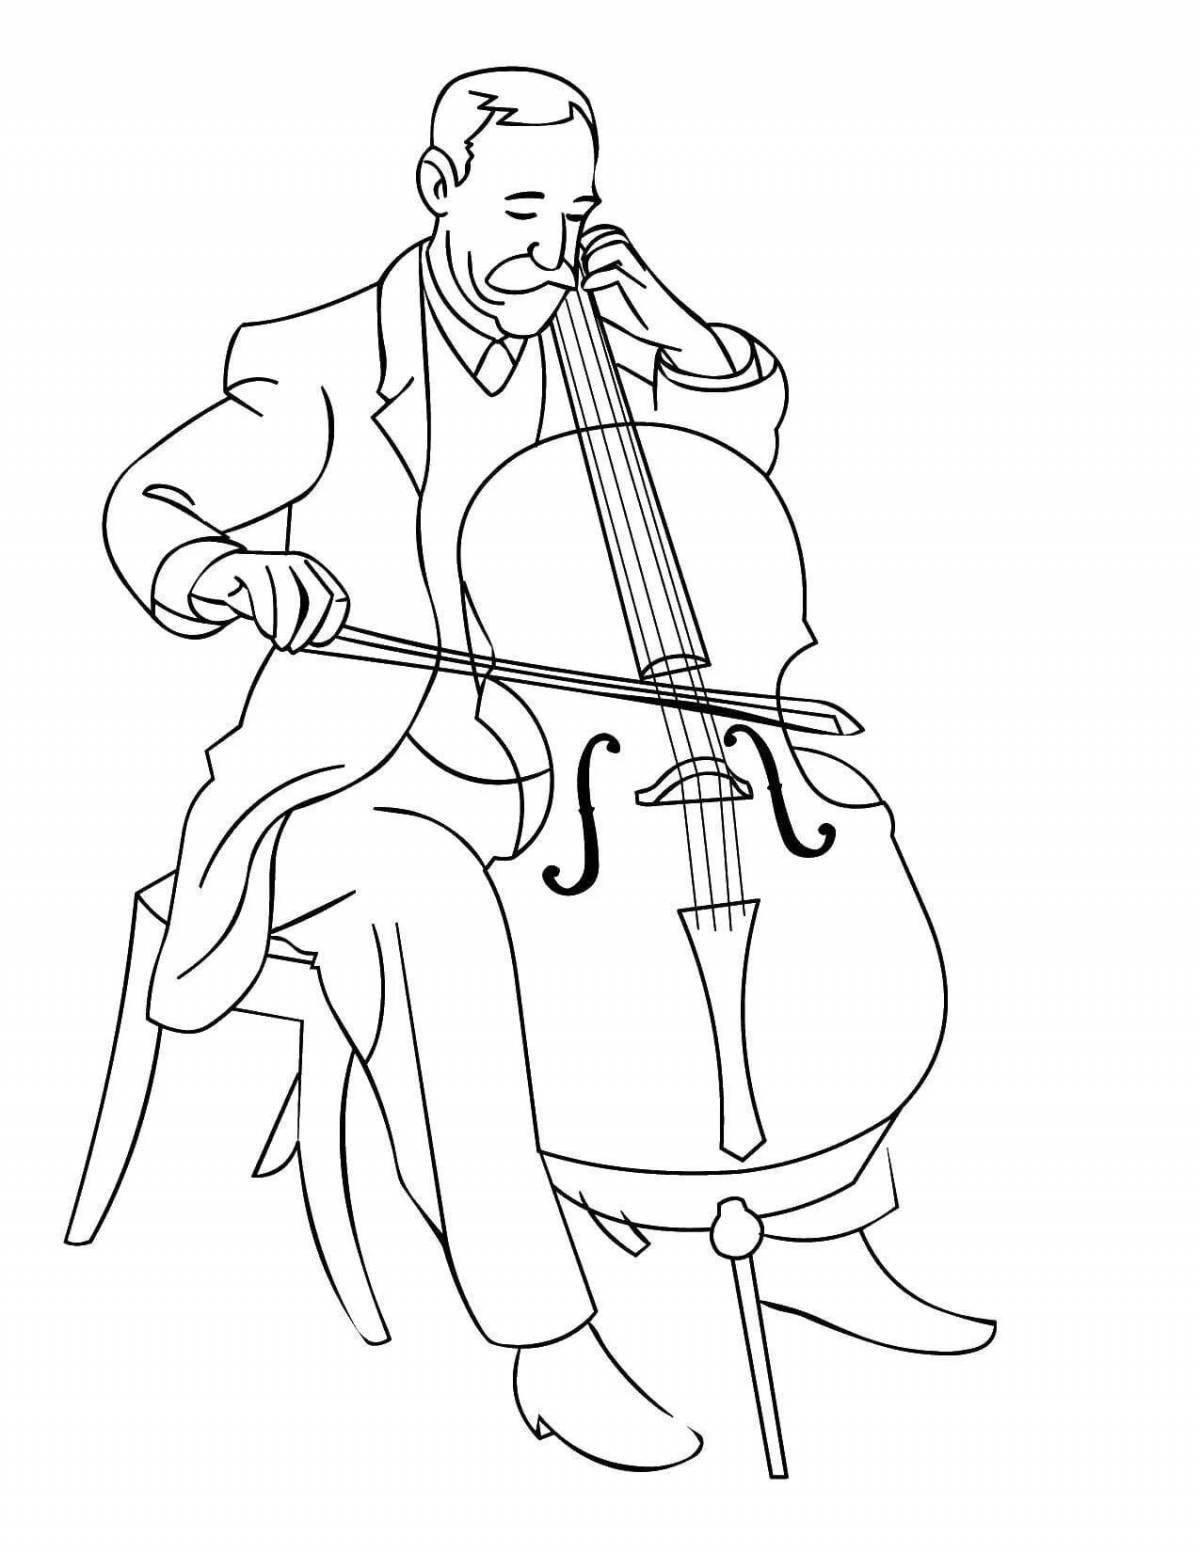 Lovely orchestra coloring book for kids